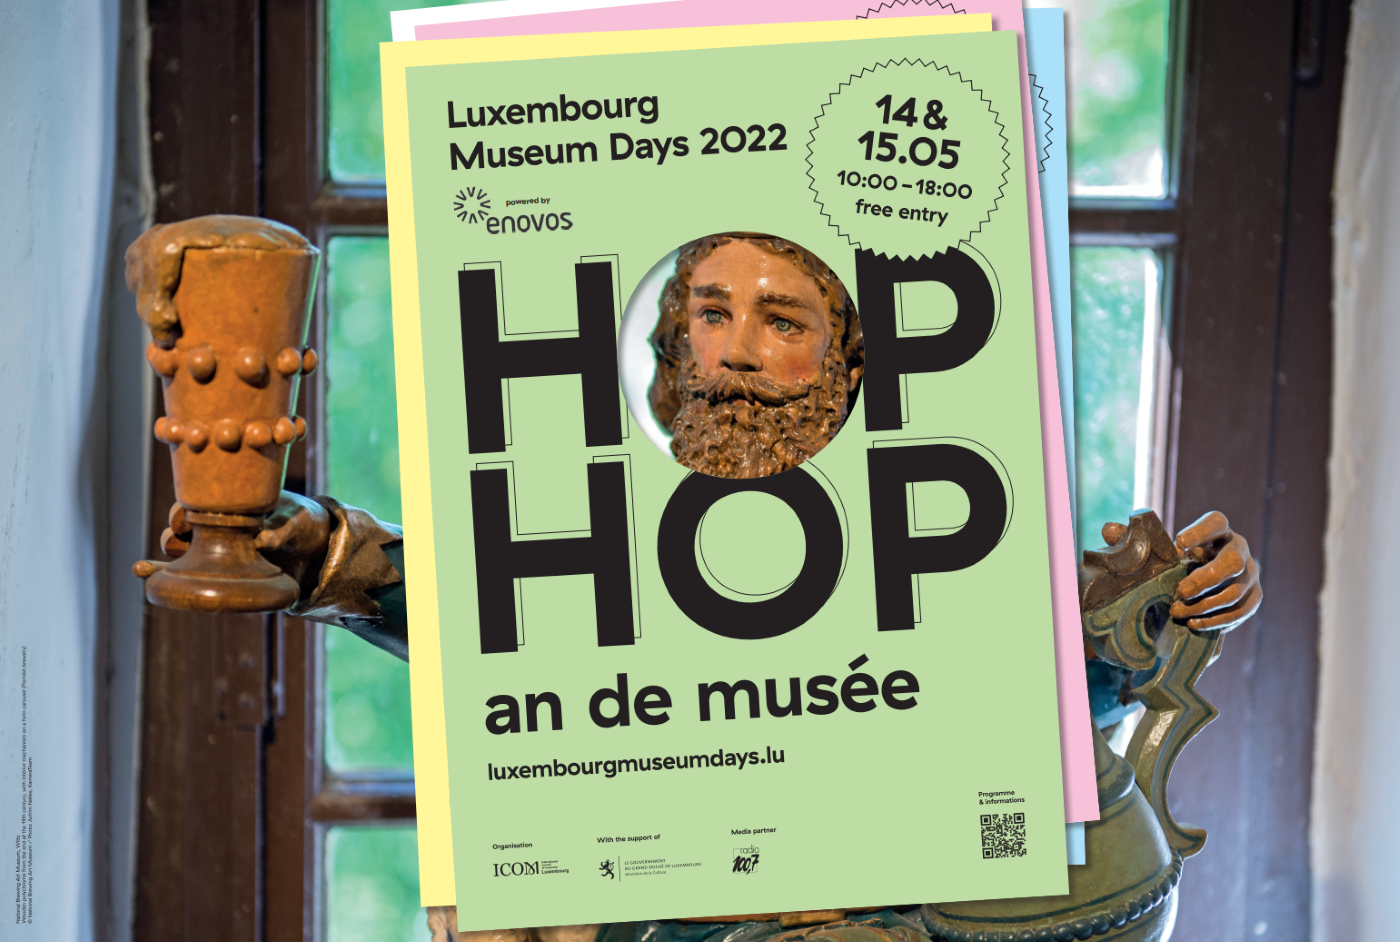 Luxembourg Museum Days 2022